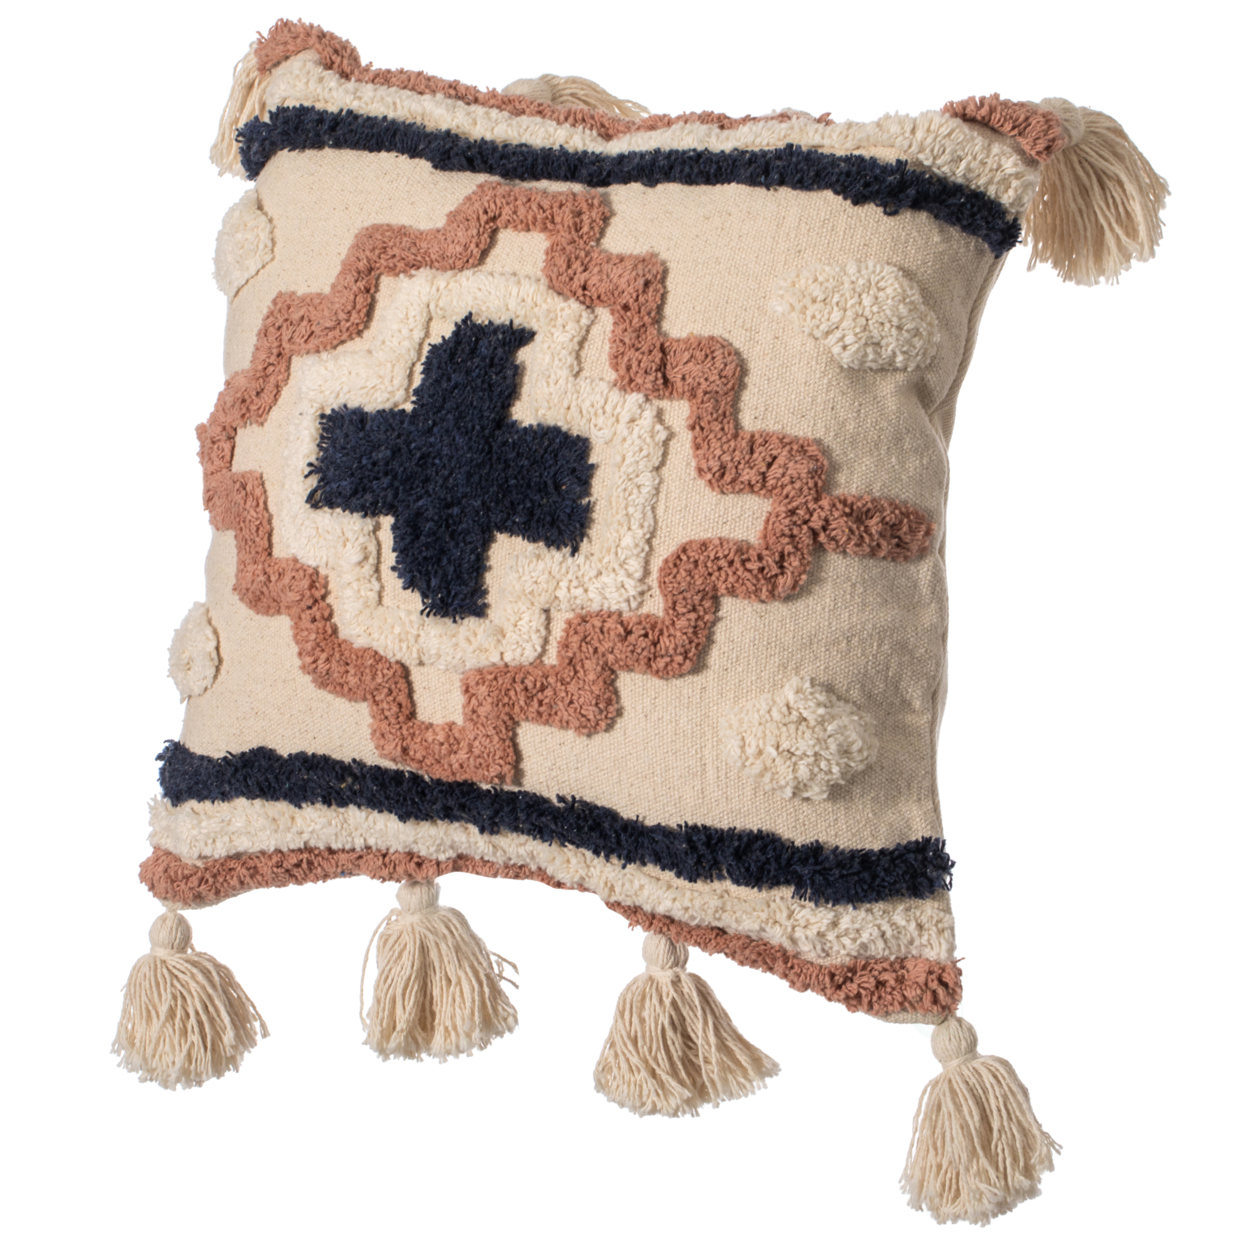 16 Handwoven Cotton Throw Pillow Cover With Tufted Designs And Side Tassels - Circle With Cushion